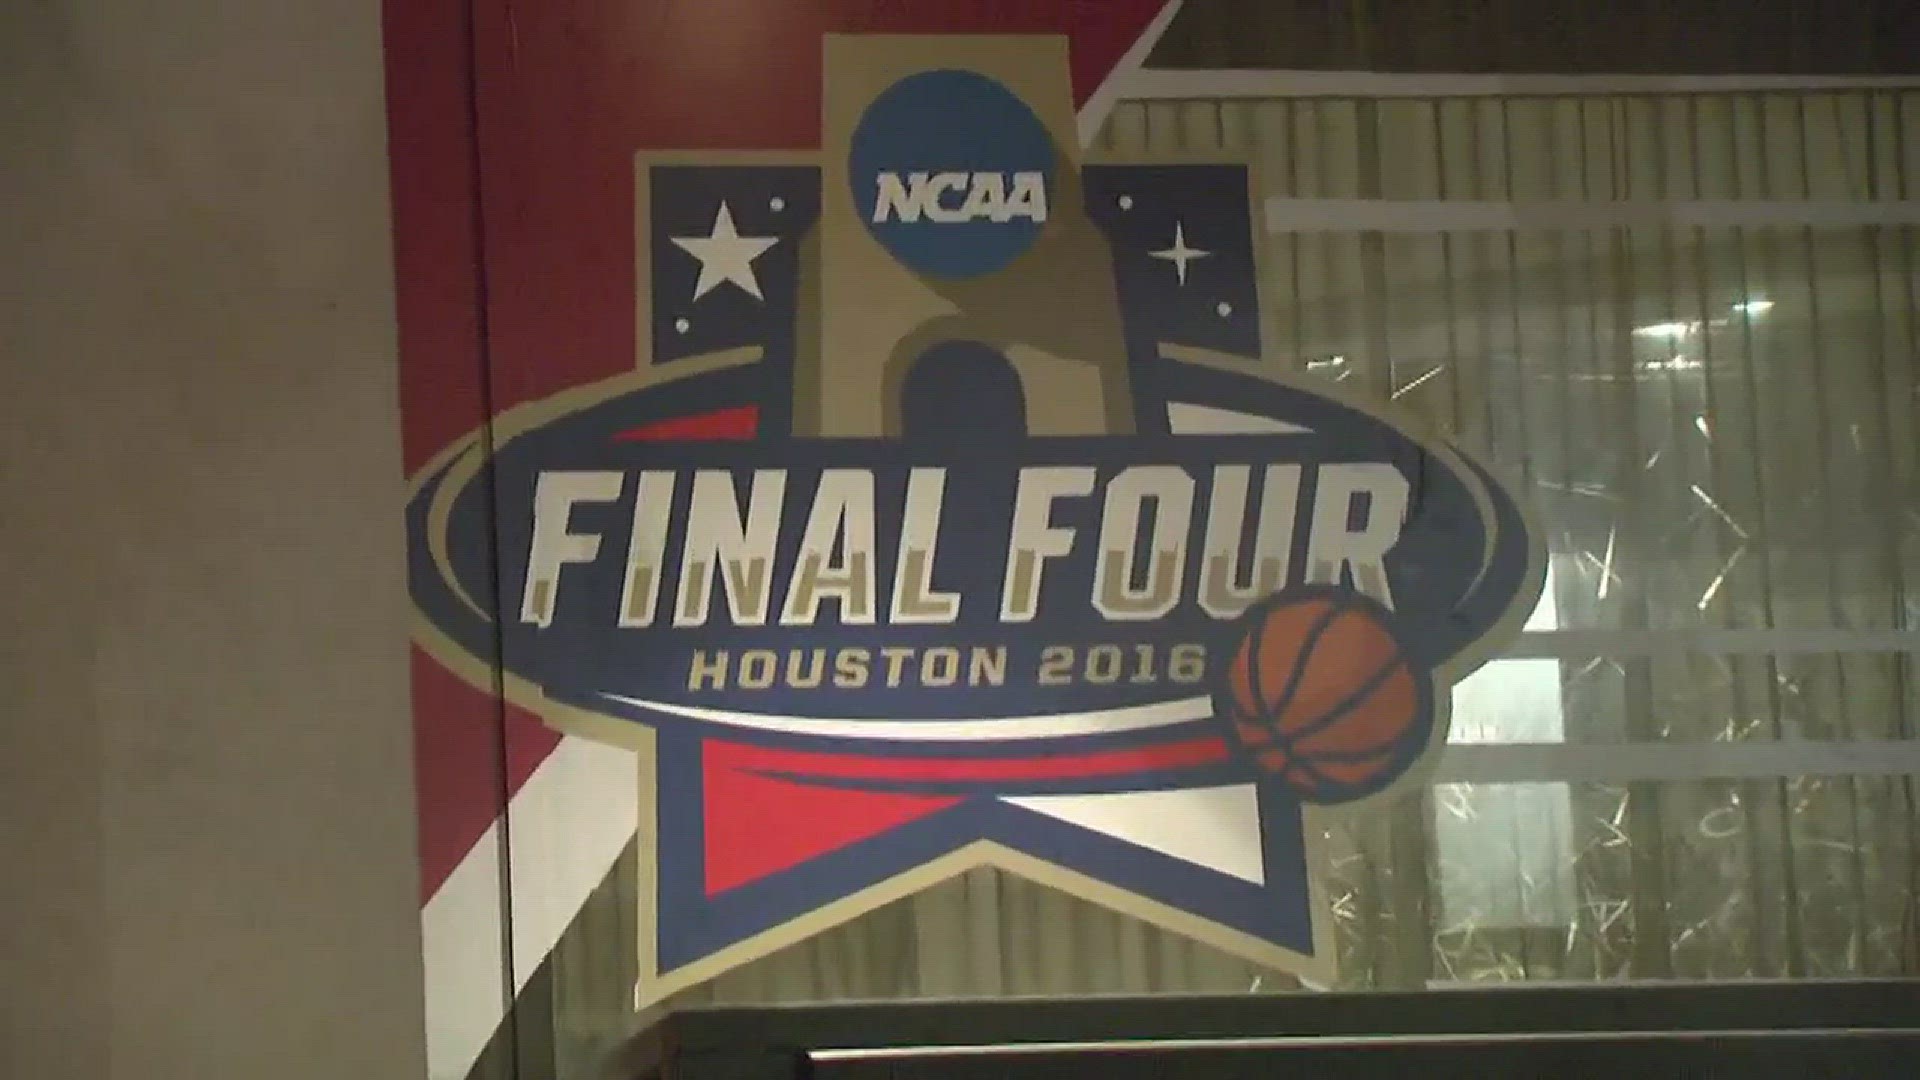 Houston will play host to more March Madness games come 2020, the NCAA announced Tuesday.